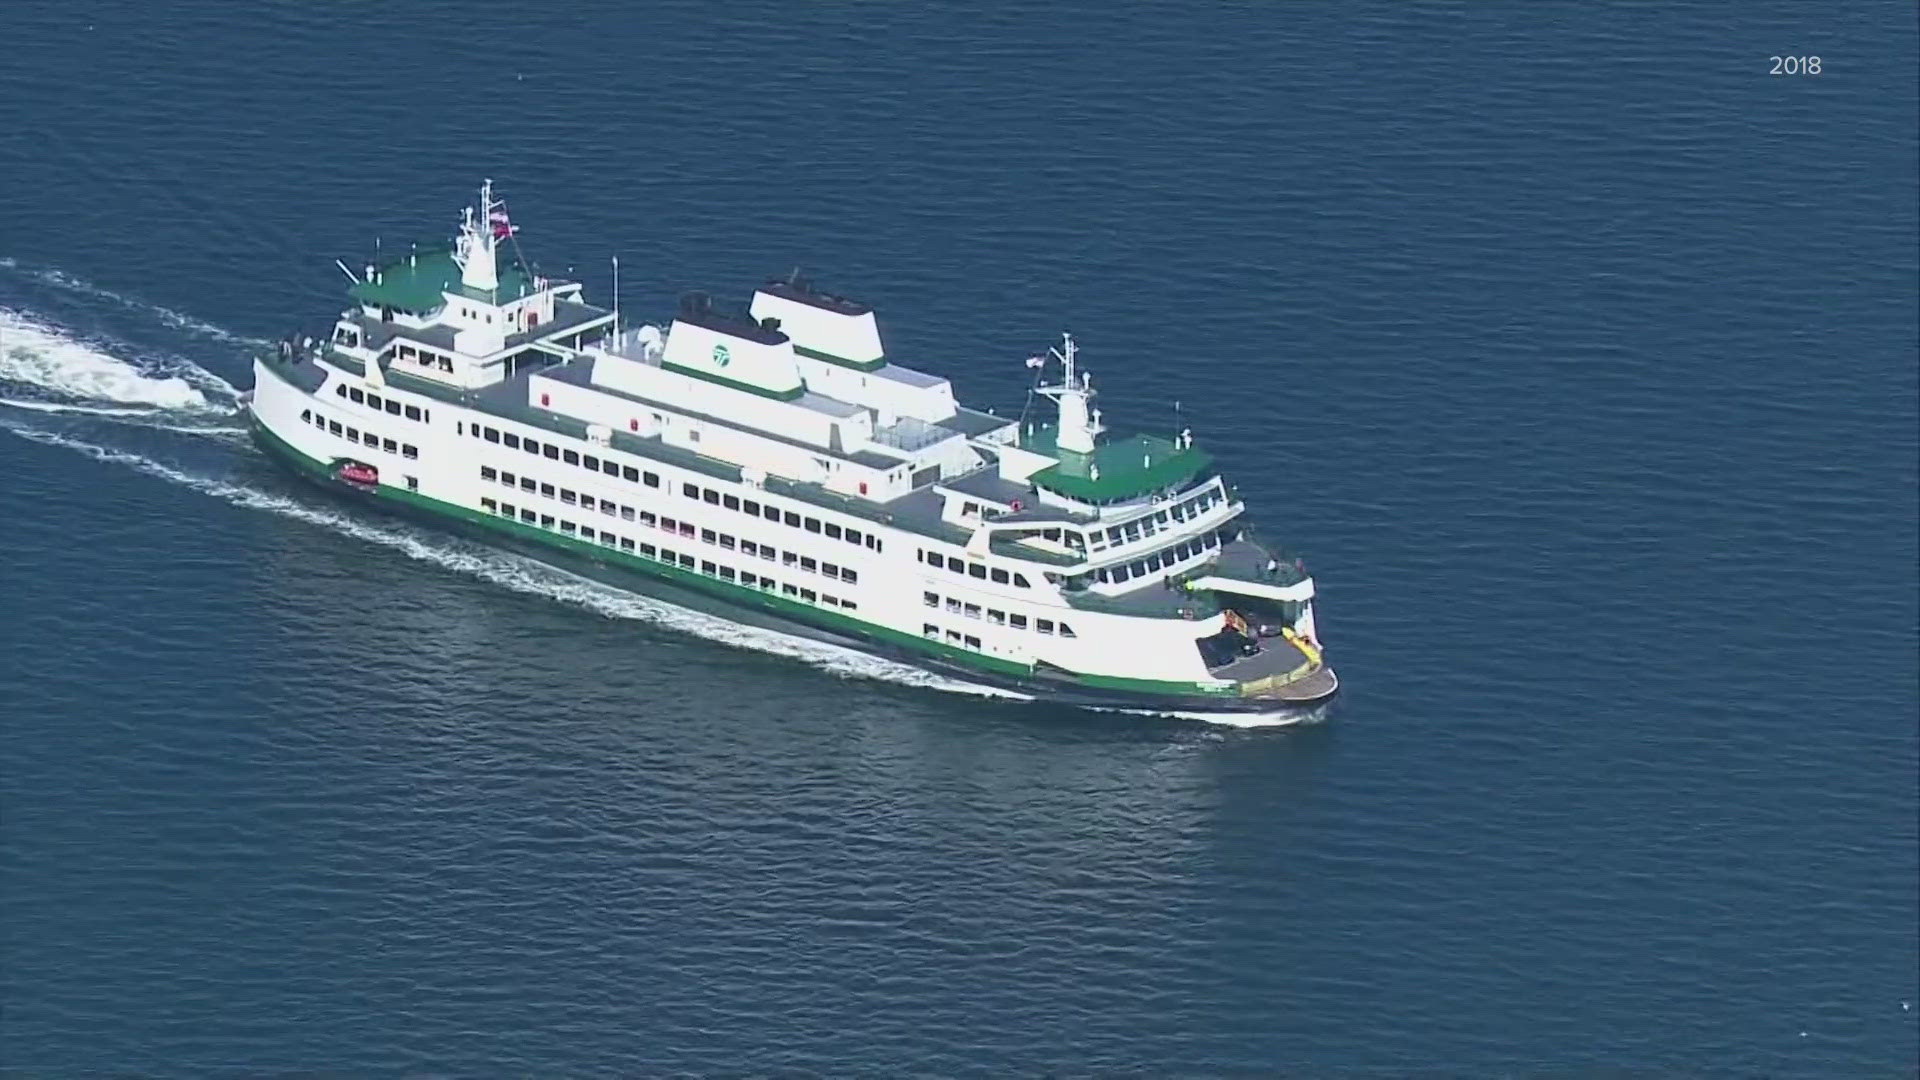 The 144-vehicle Suquamish will be taken out of the schedule for four weeks. This will impact the Edmonds/Kingston and Mukilteo/Clinton ferry routes.